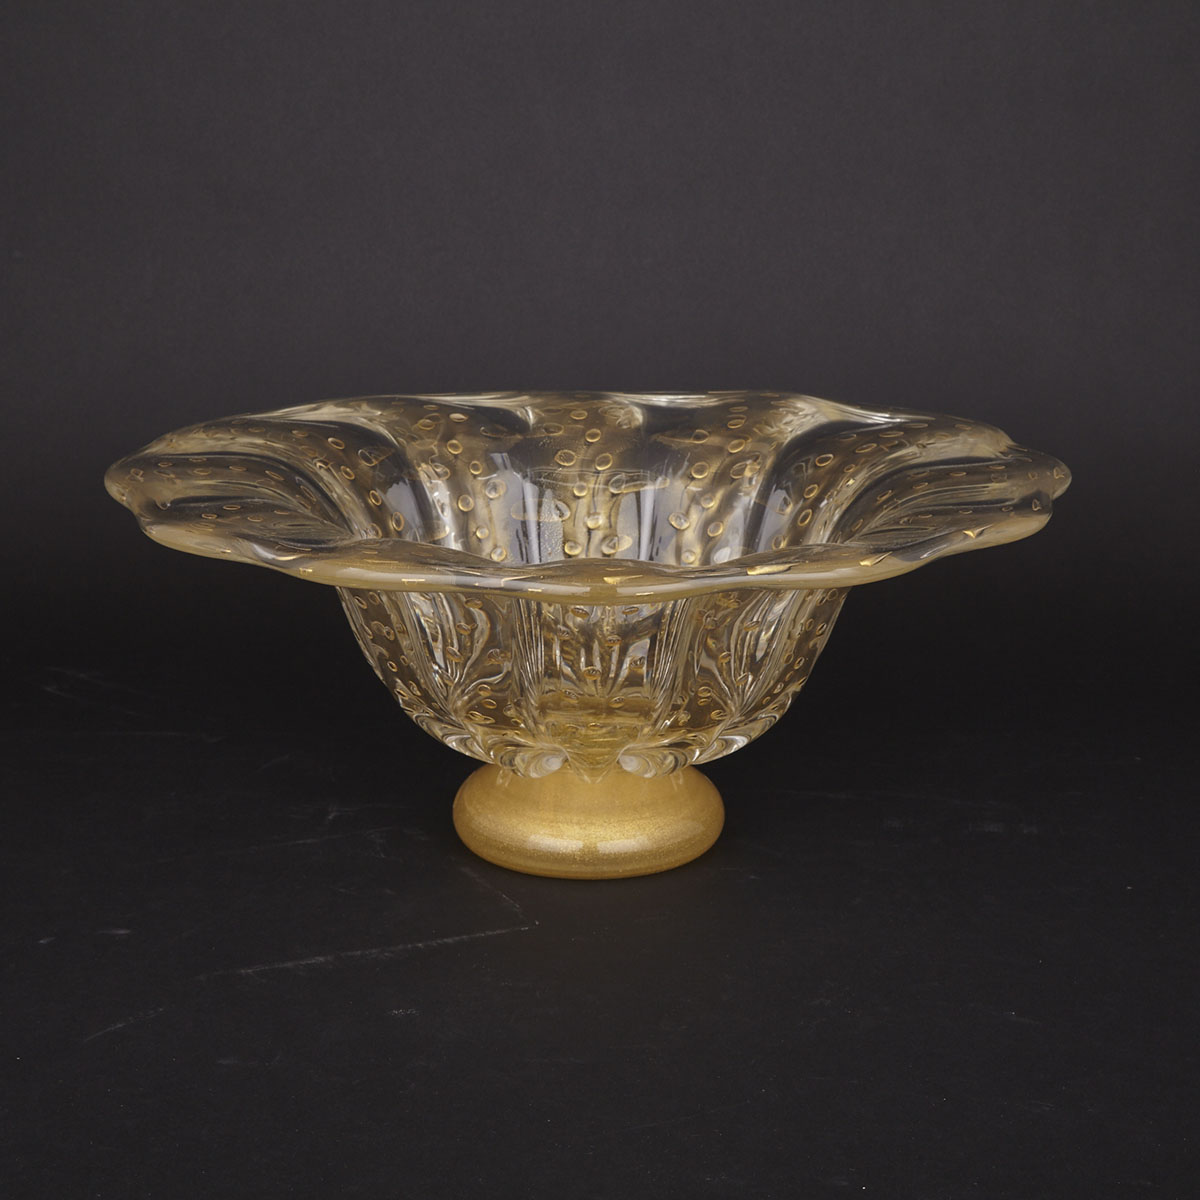 Stefano Toso, Murano Glass Lobed Footed Bowl, 20th century